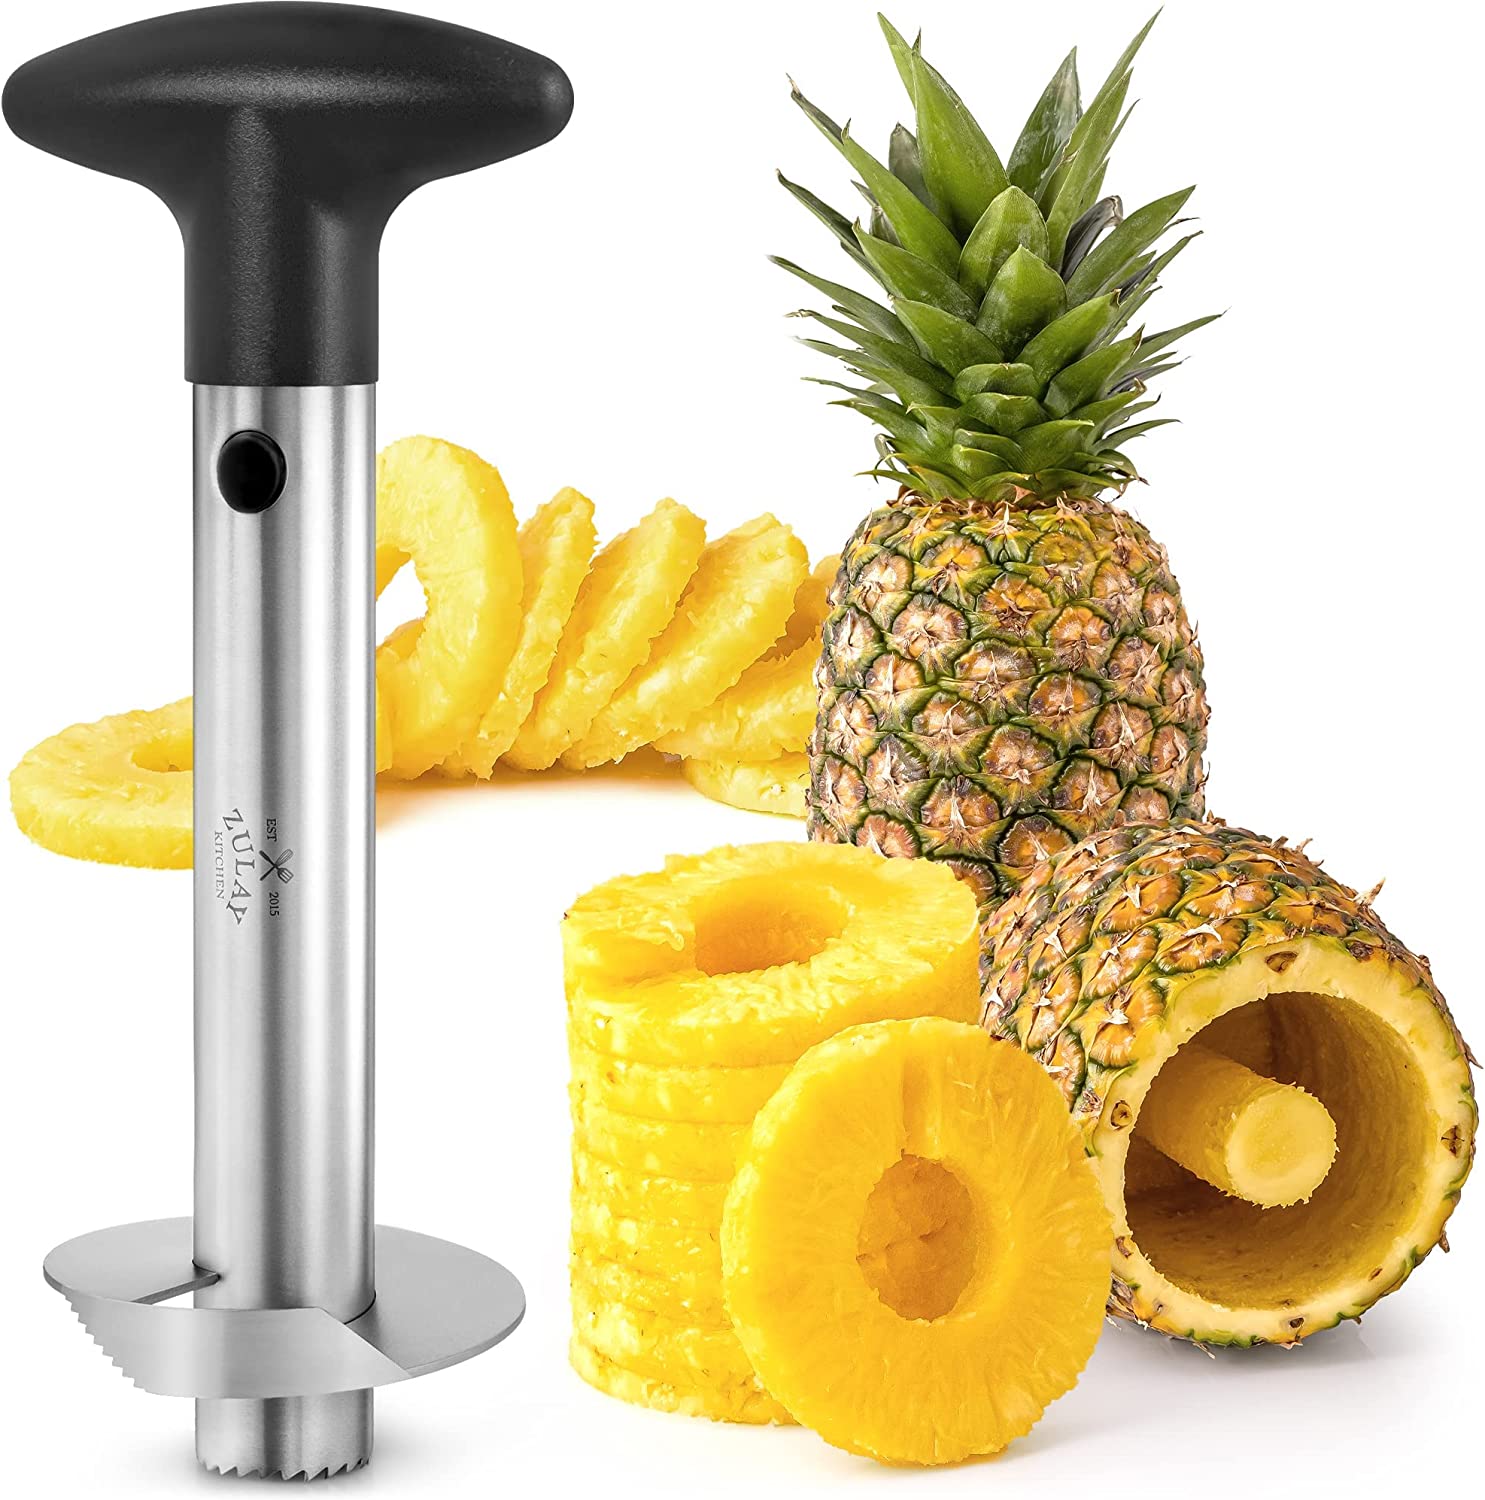 Review: OXO Good Grips Stainless Steel Pineapple Corer & Slicer - YuenX